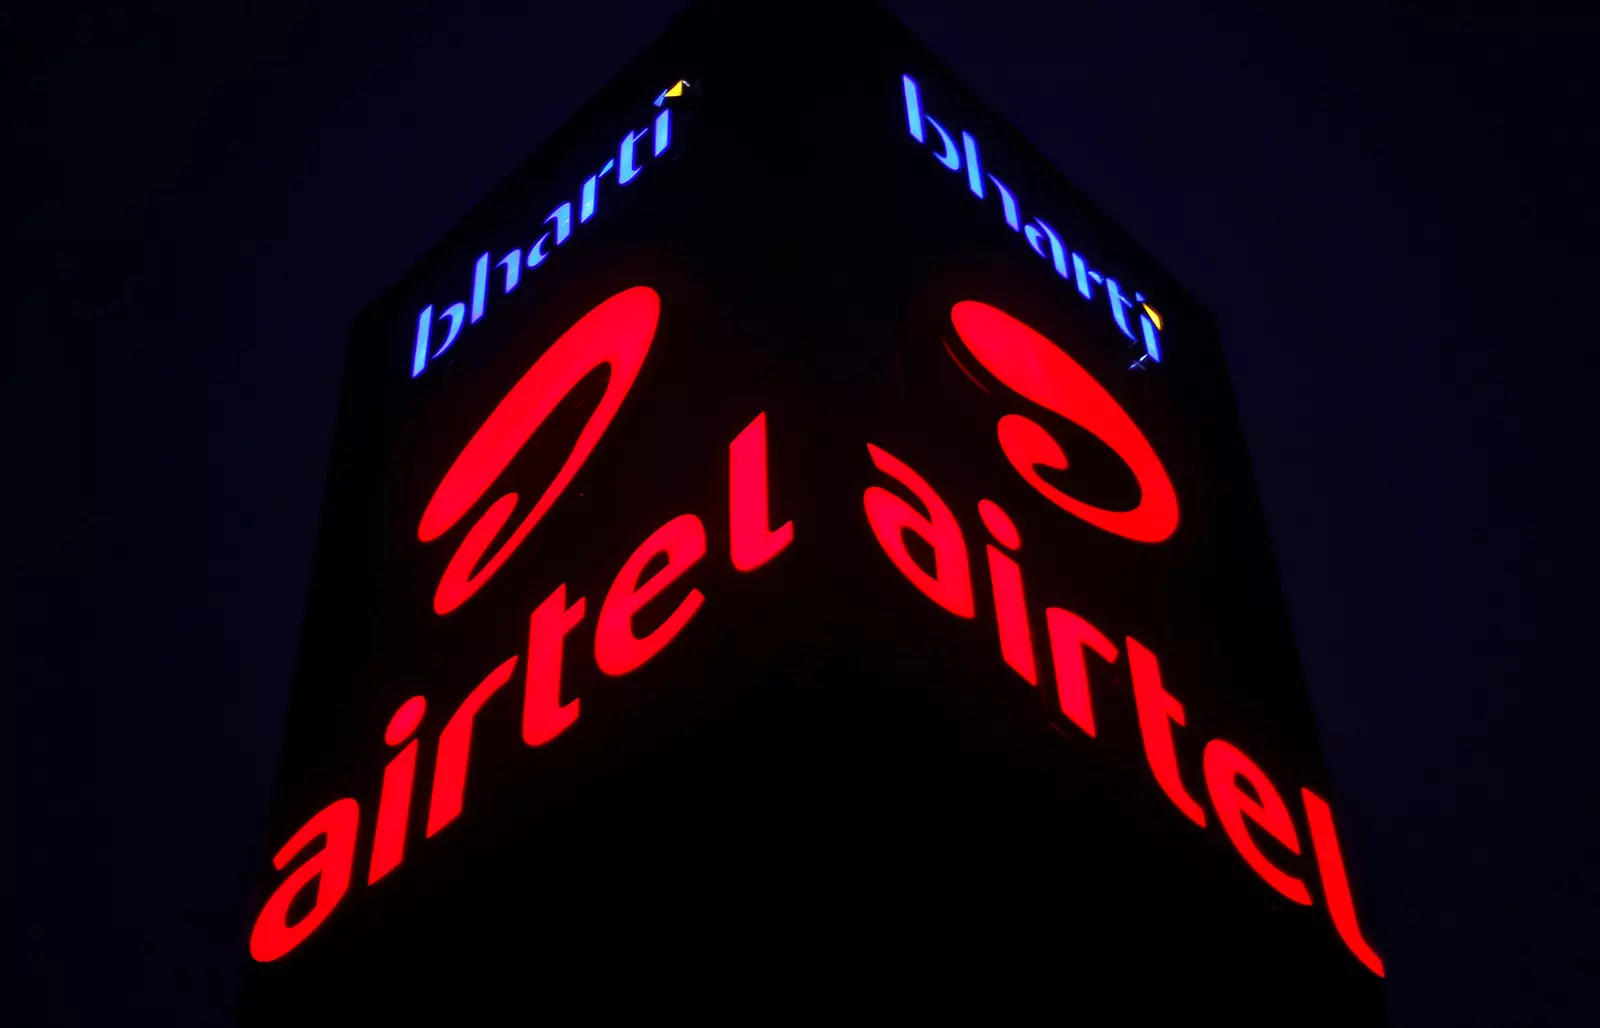 A Bharti Airtel office building is pictured in Gurugram